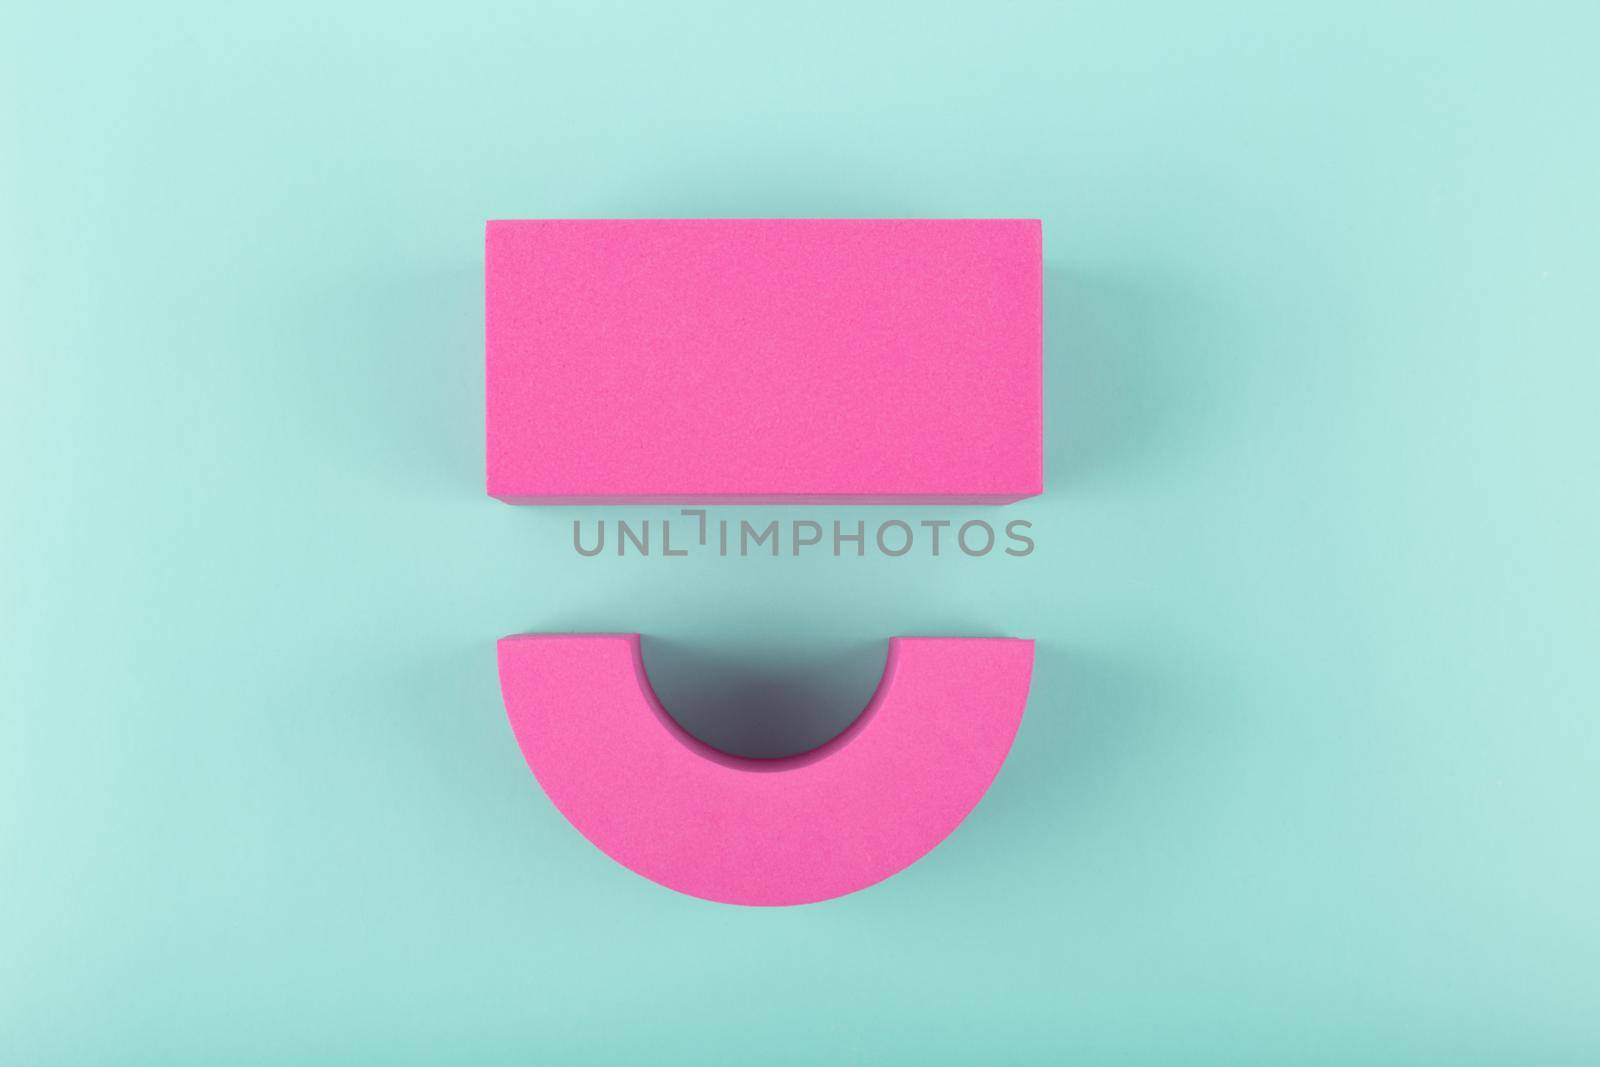 Creative flat lay with pink happy smile symbol made of figures on blue background with copy space. Concept of Smile day, emotions, emoji or mental health